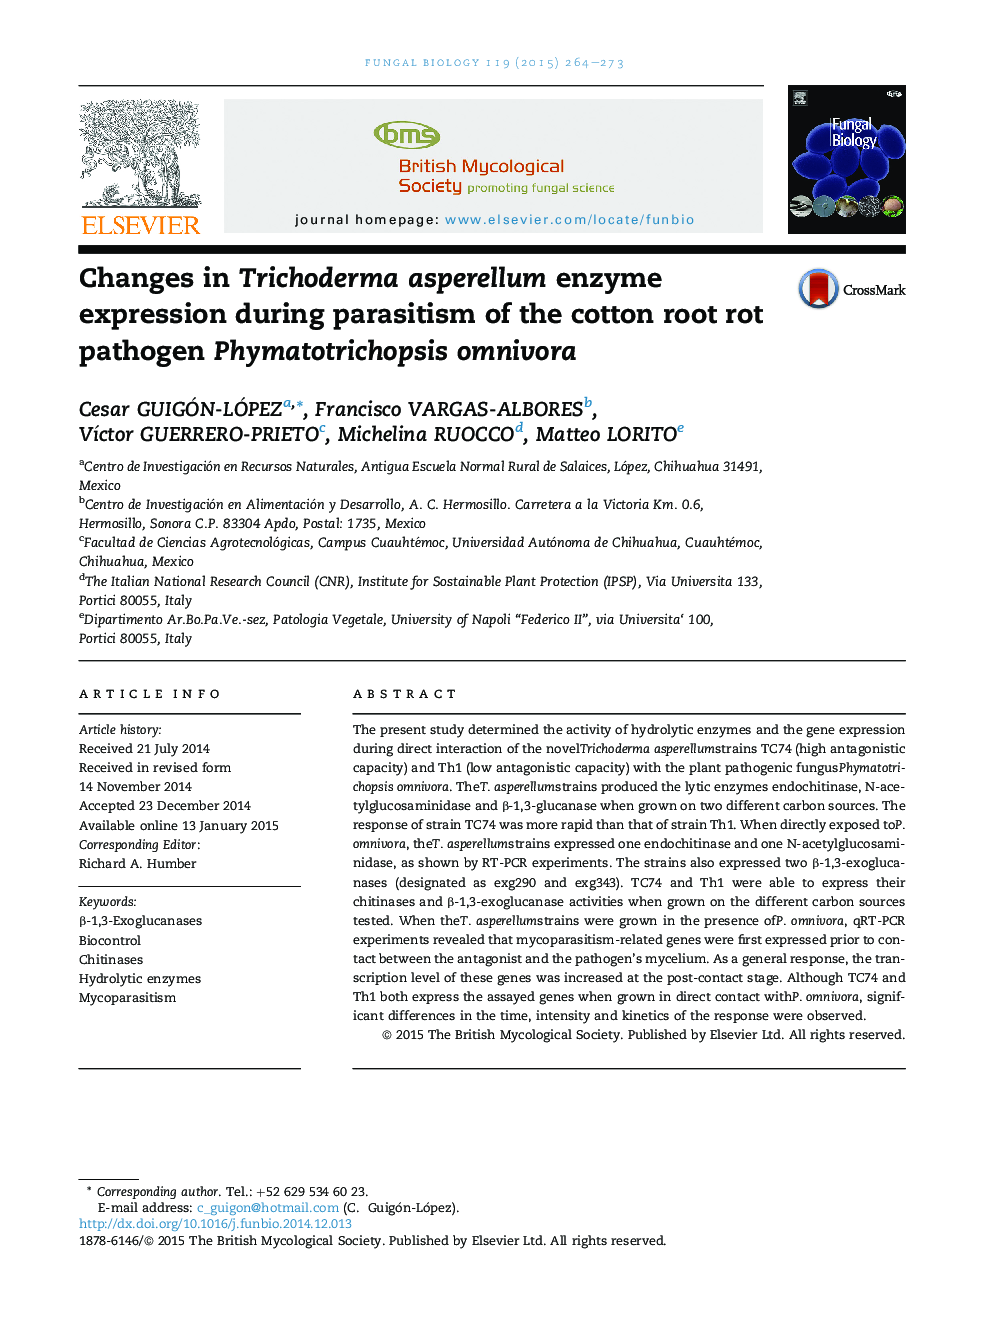 Changes in Trichoderma asperellum enzyme expression during parasitism of the cotton root rot pathogen Phymatotrichopsis omnivora